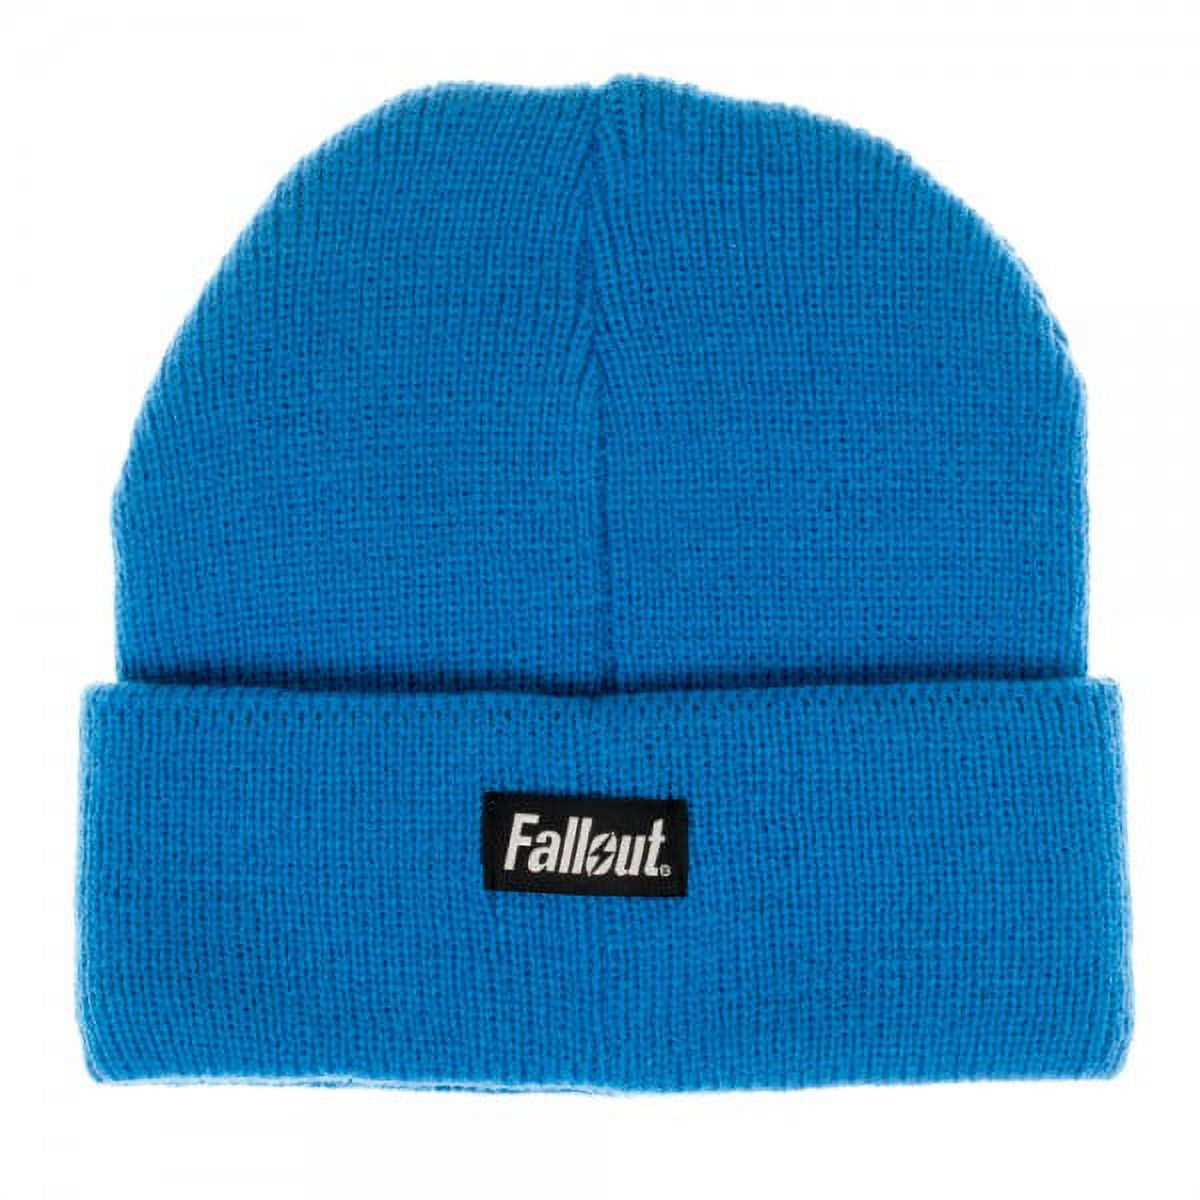 Beanie Cap - Fallout - Vault Boy Blue Single Layer Cuff New Licensed kc4195fot - image 2 of 2